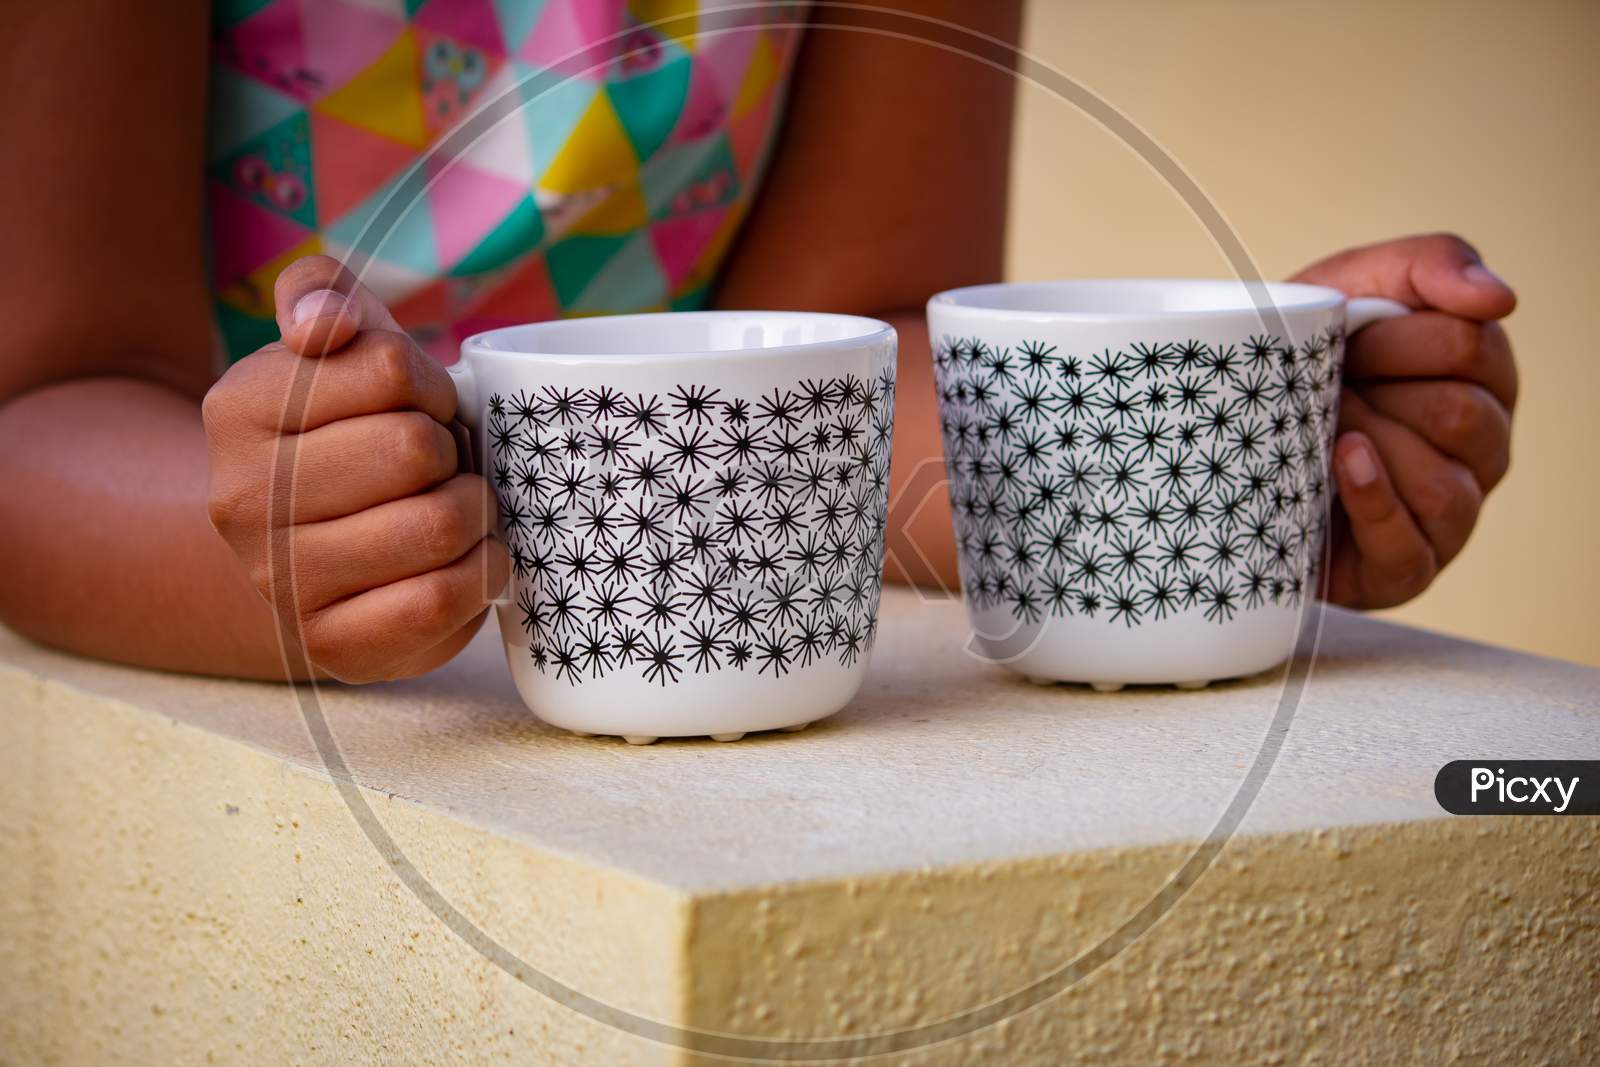 View Of Young Girl Holding Coffee Mugs In Both Her Hands